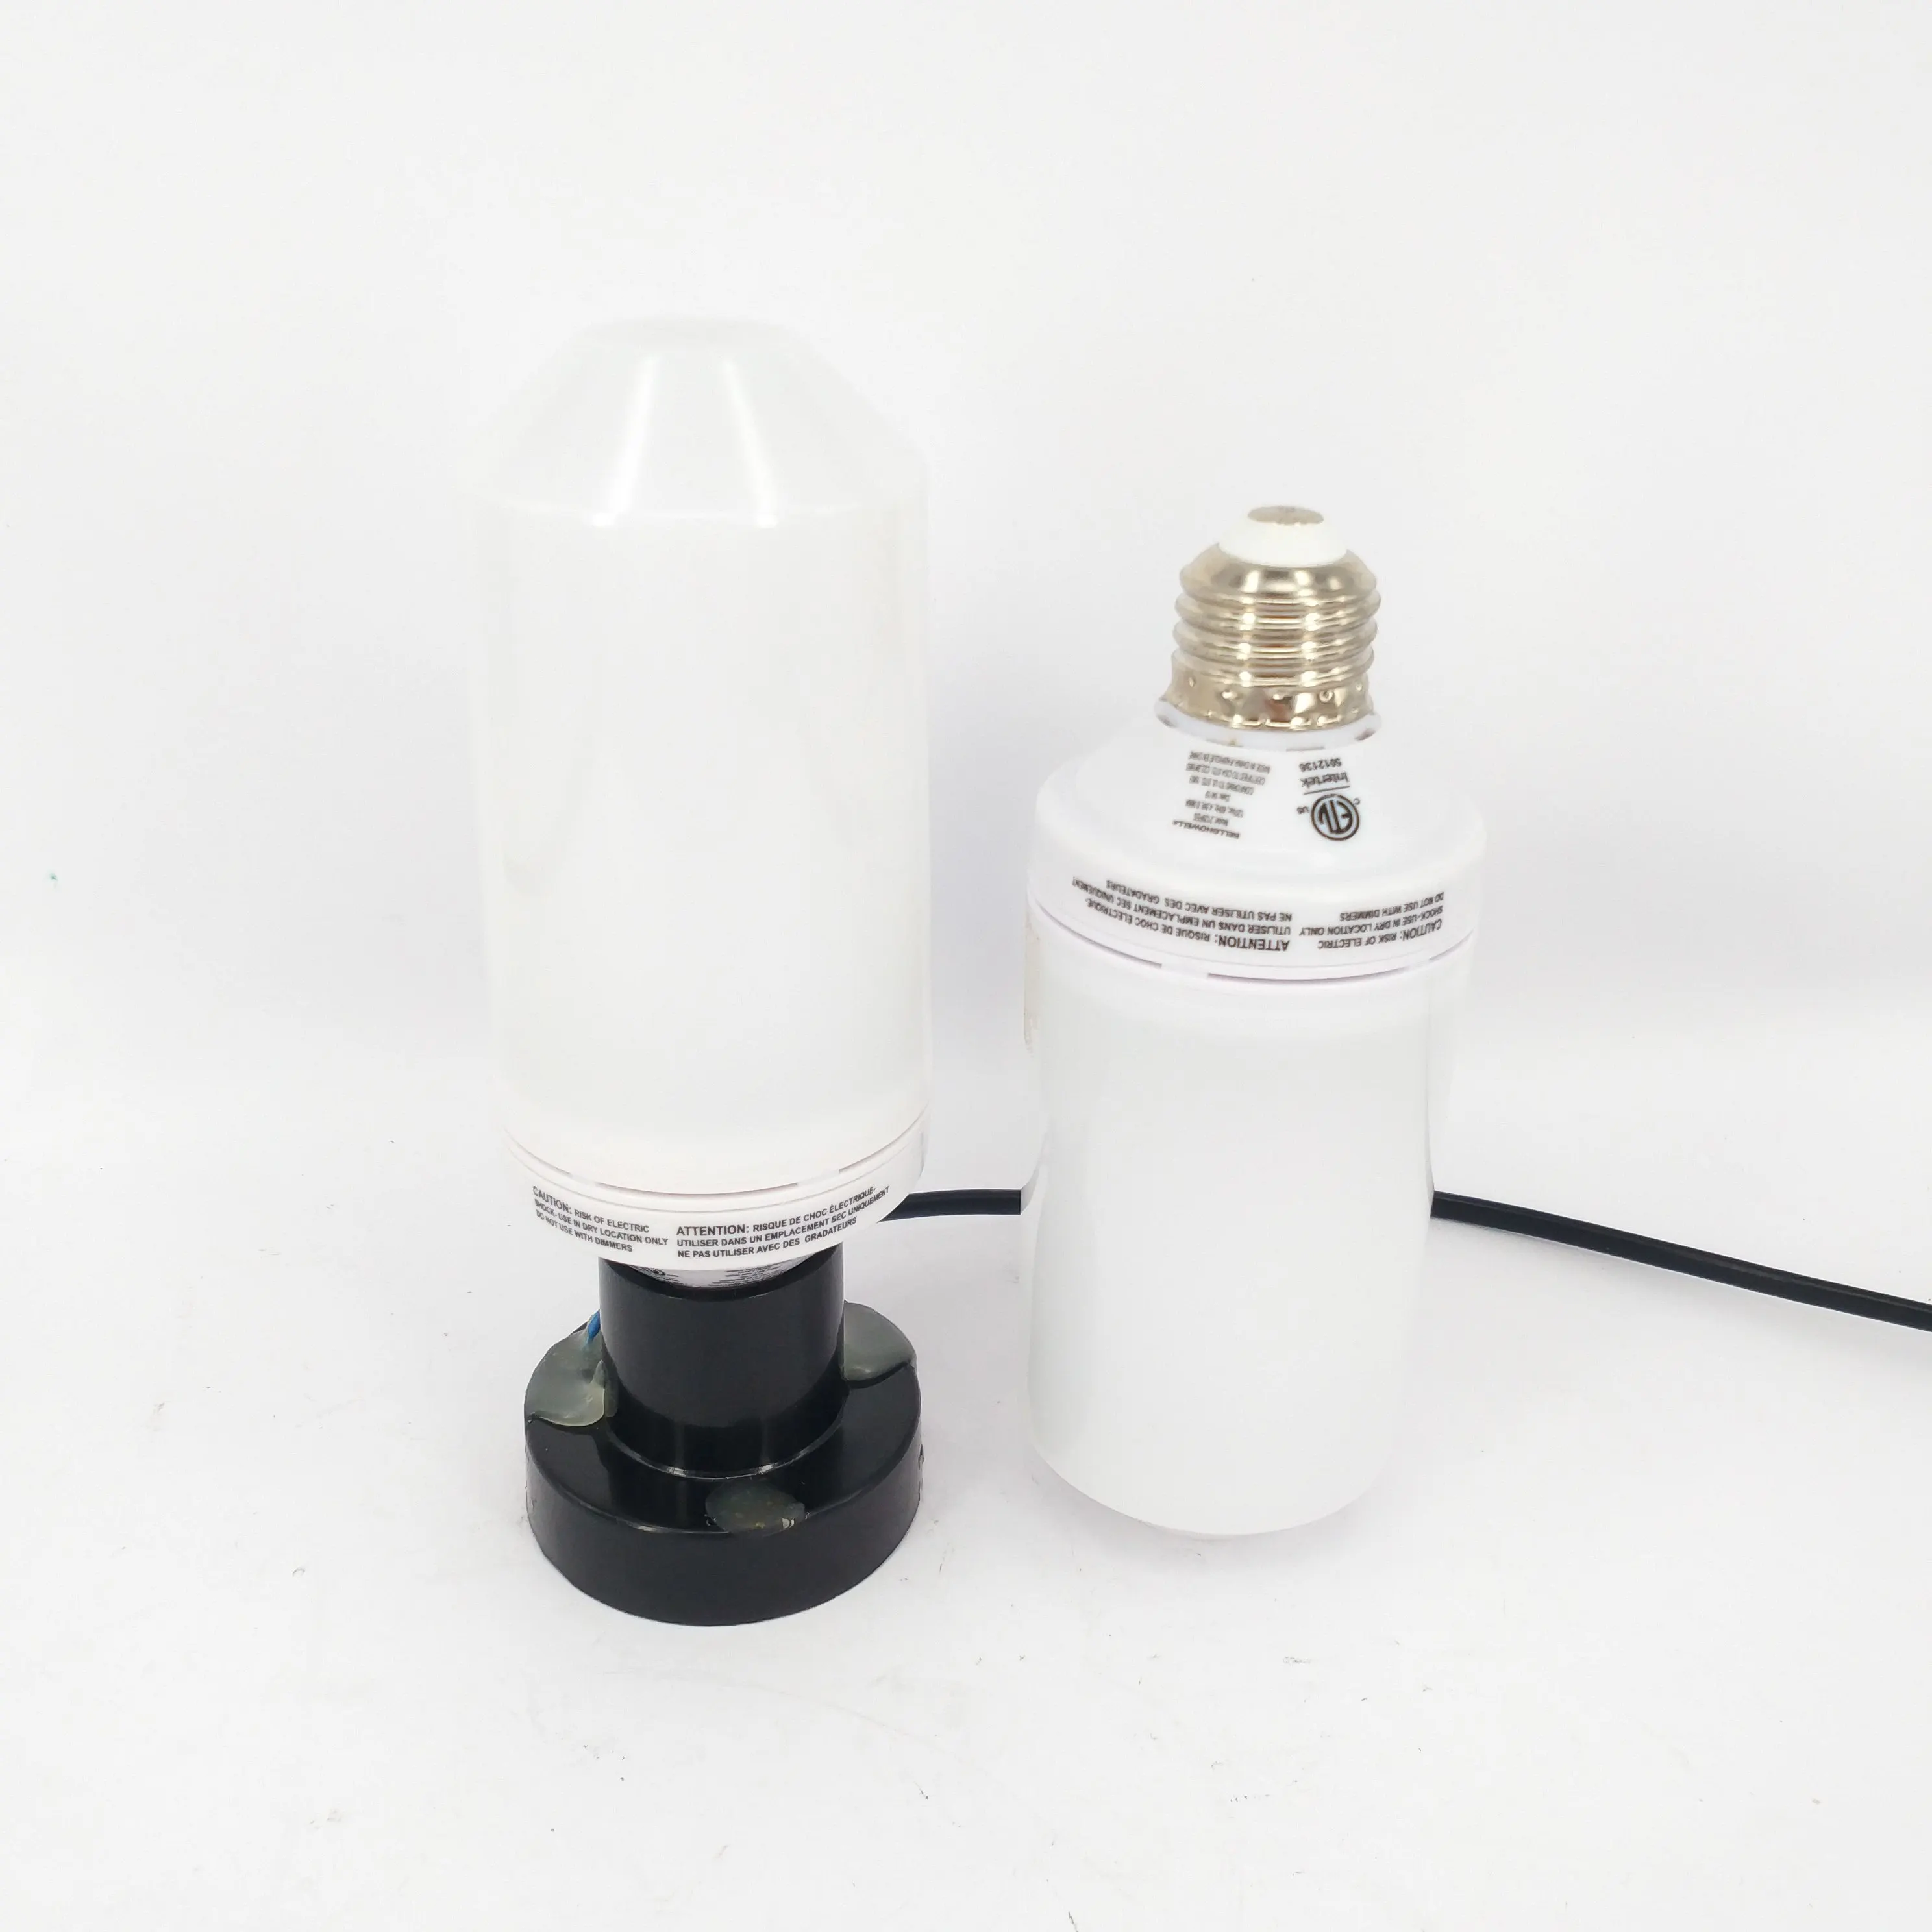 in stock E26 flame bulb light AC110-220V flame flickering effect light bulb 50% Discount sales products